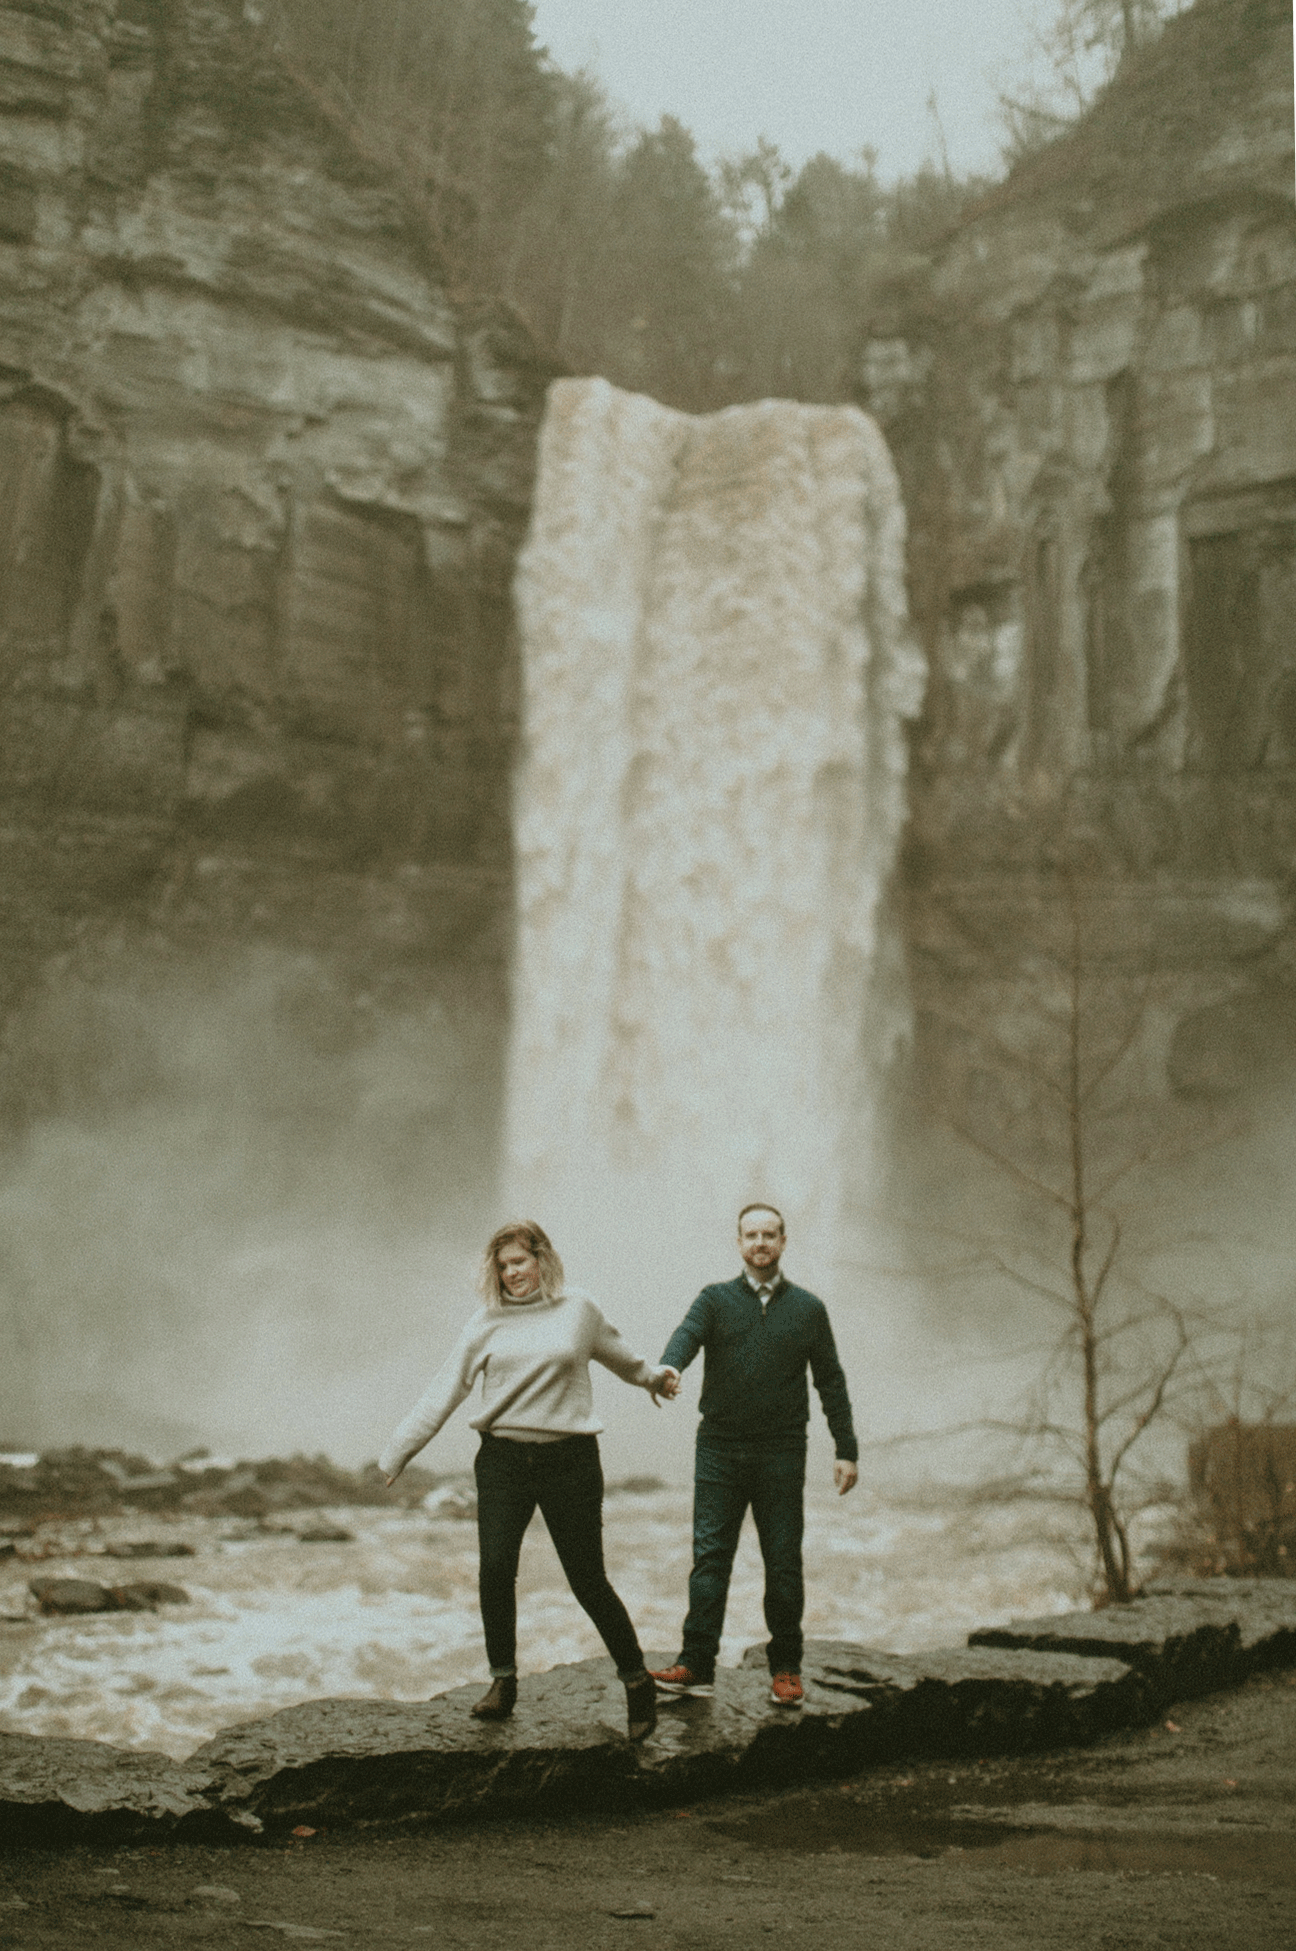 jordan-casey-engagement-session-taughannock-falls-ithaca-ny-emilee-carpenter-photography-8.gif